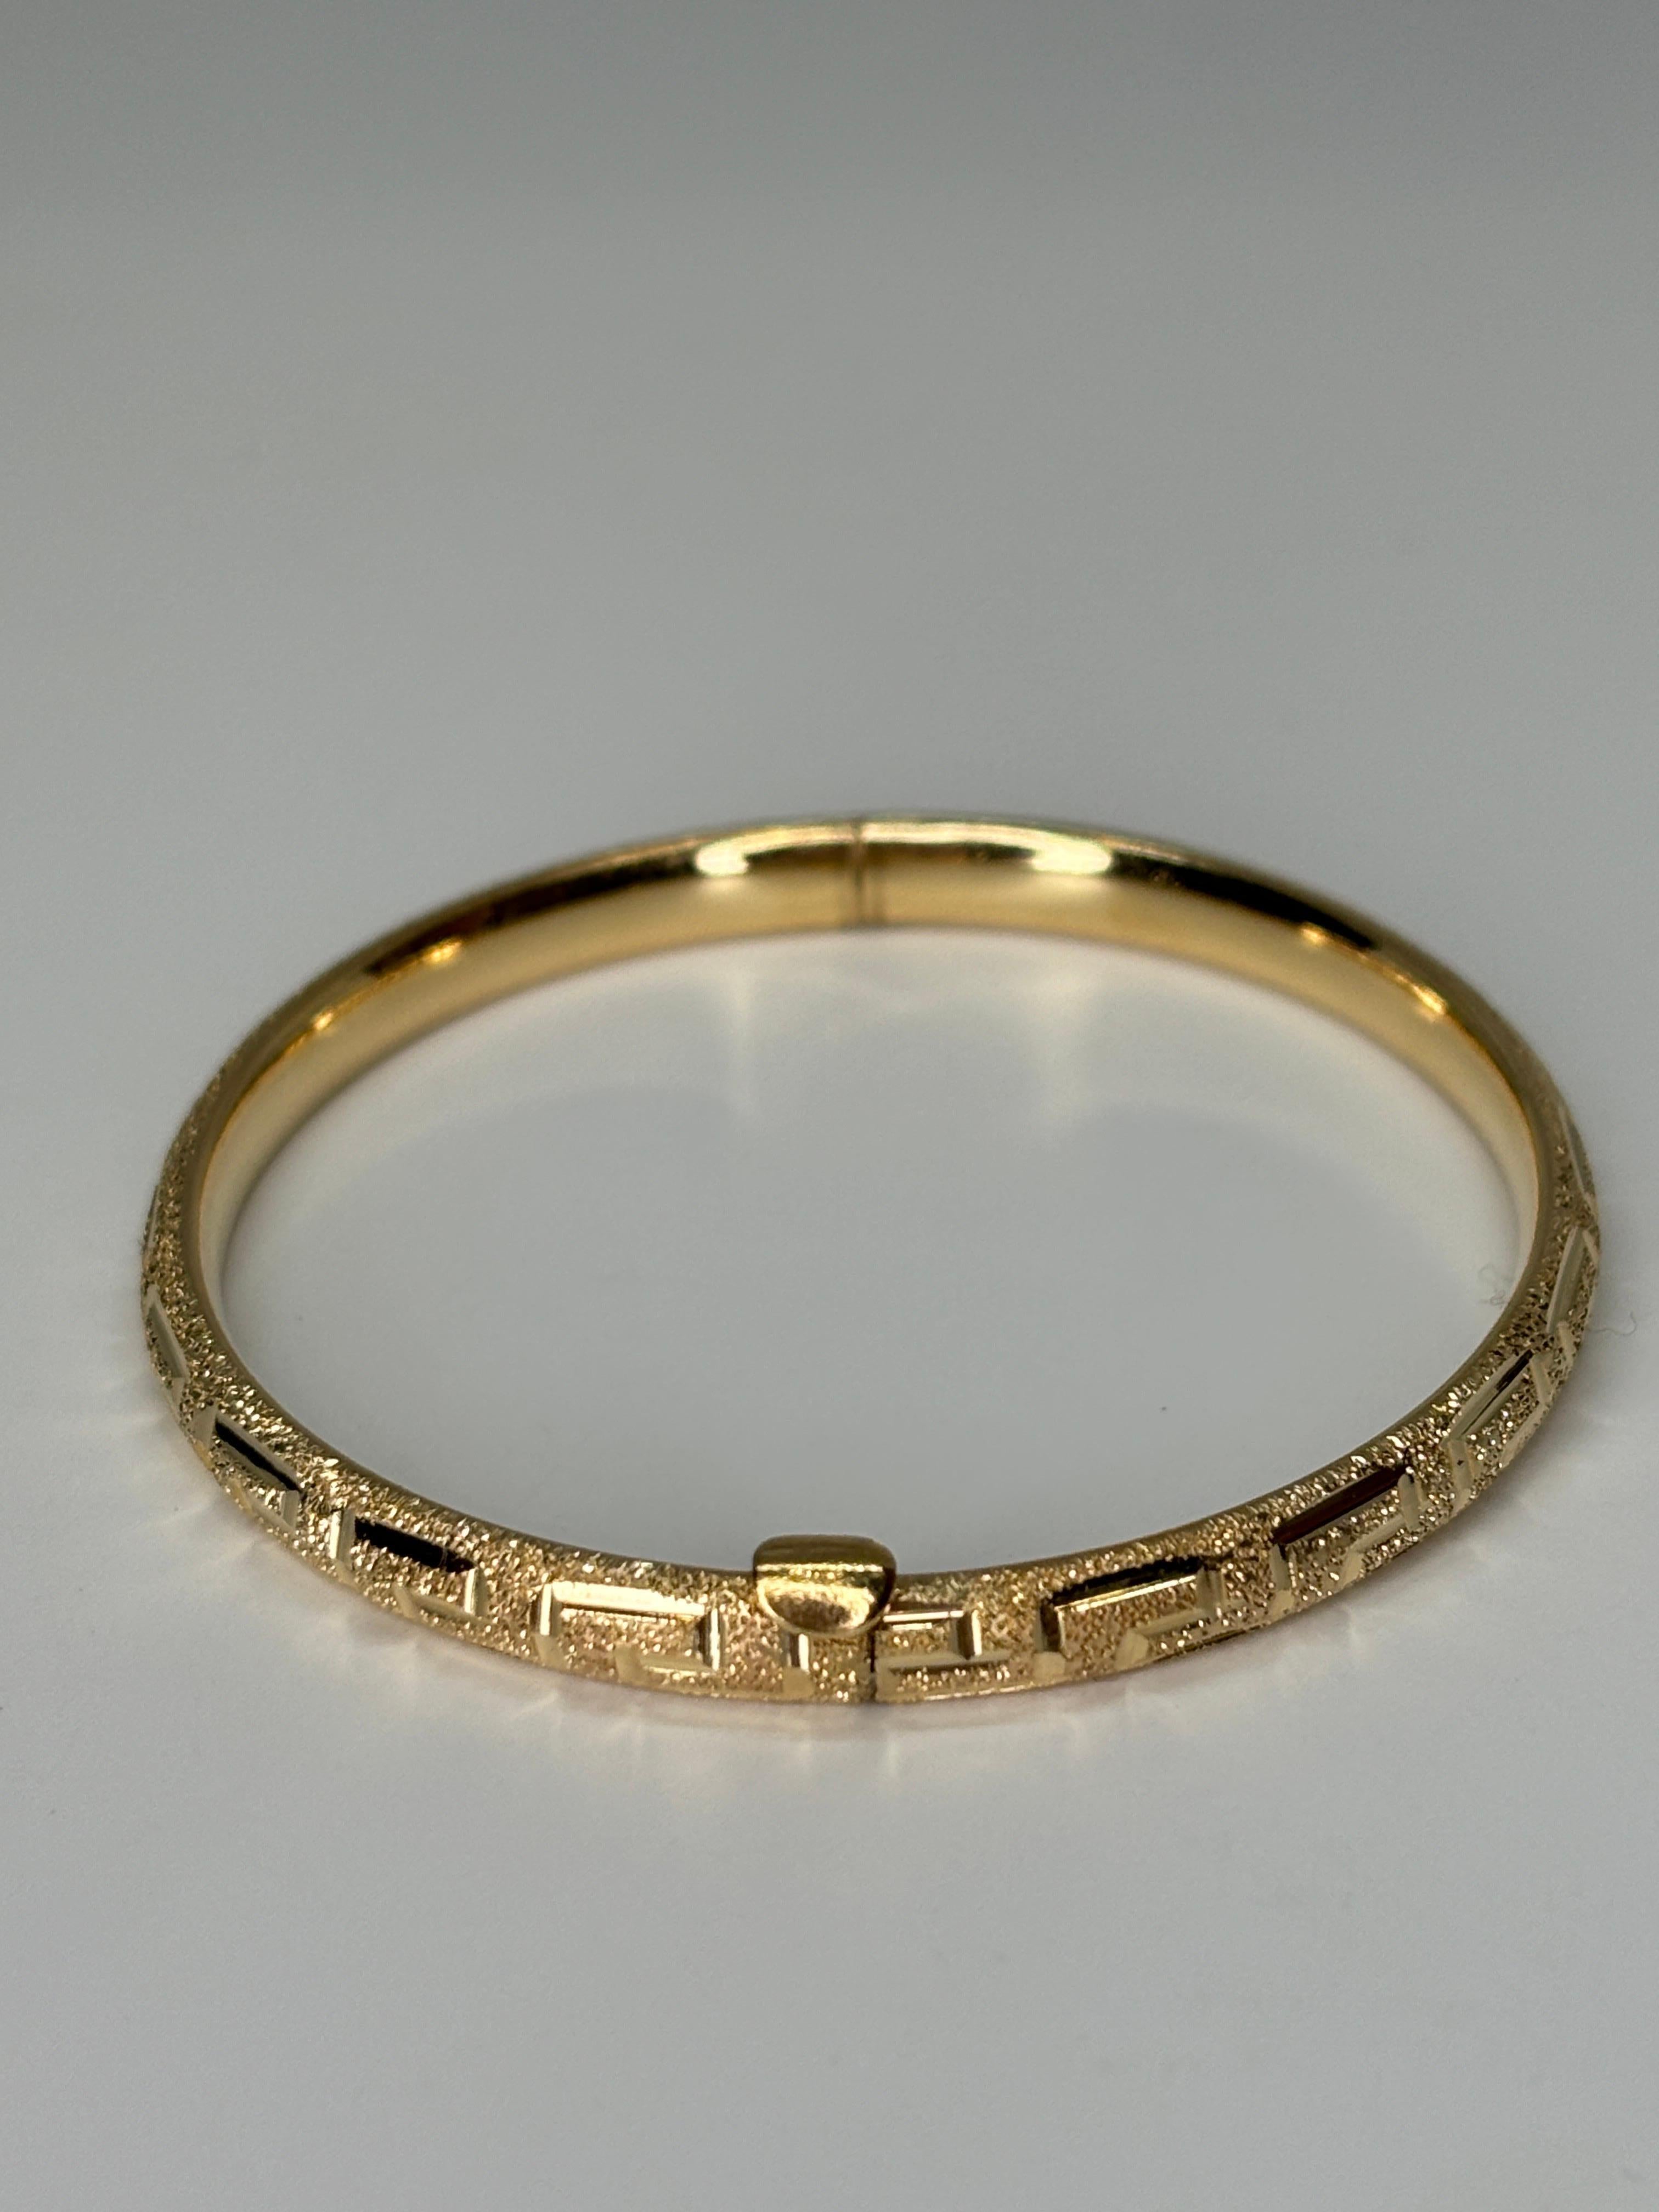 14k Yellow Gold Small Size or Childrens Greek Key Bangle Bracelet  For Sale 3